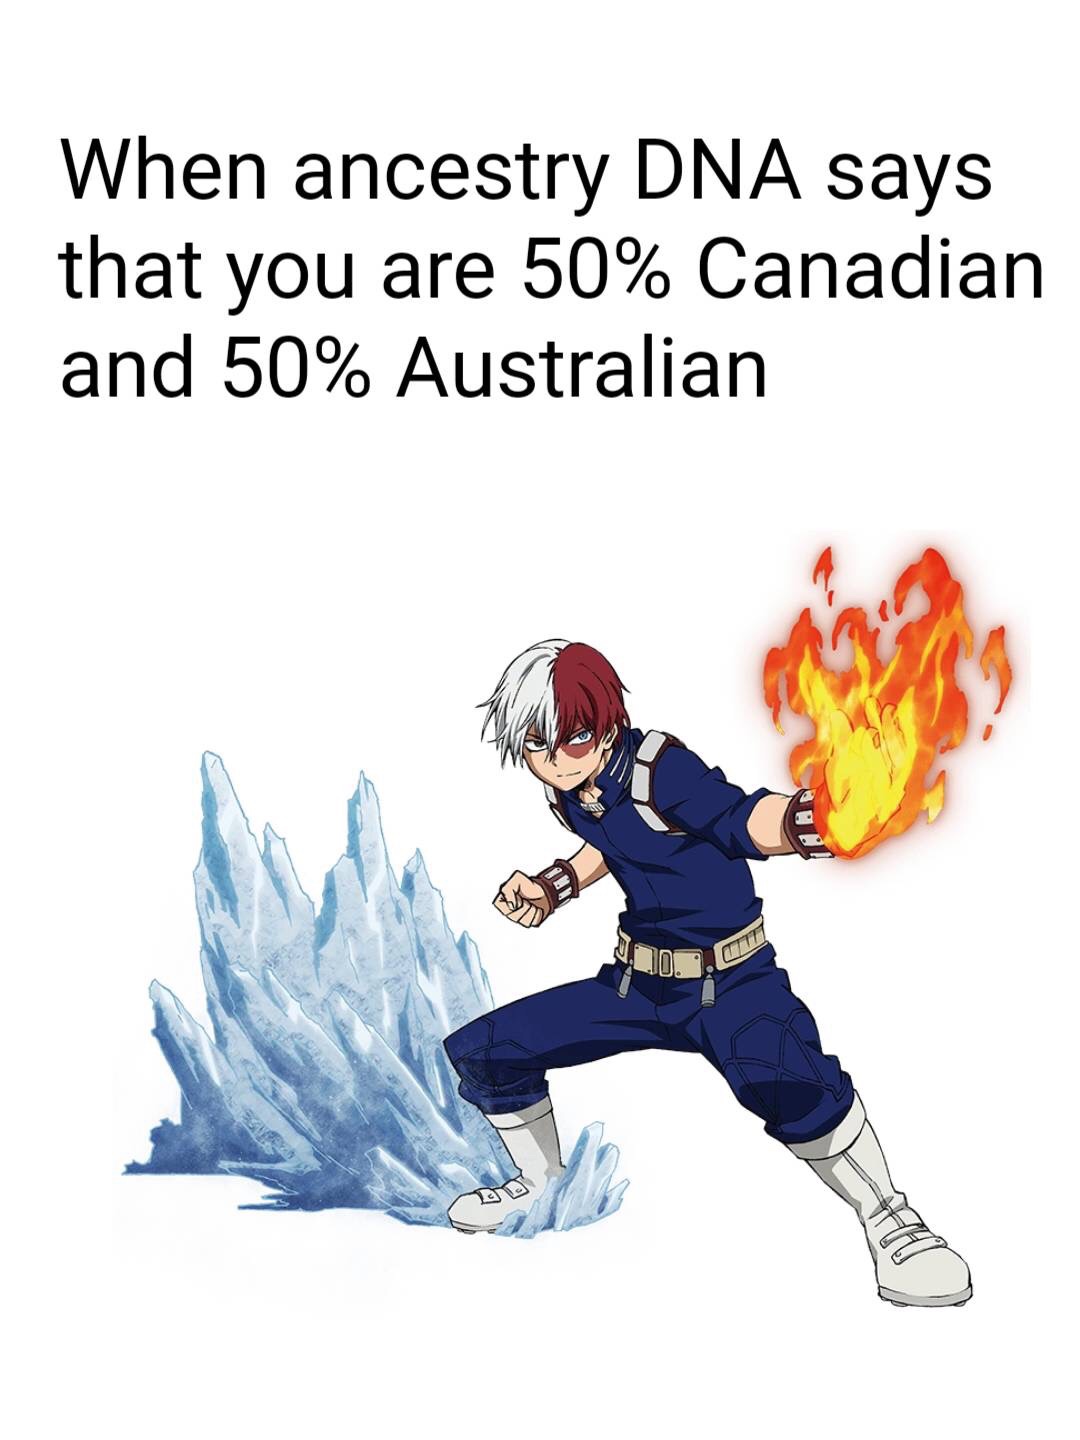 shoto todoroki - When ancestry Dna says that you are 50% Canadian and 50% Australian